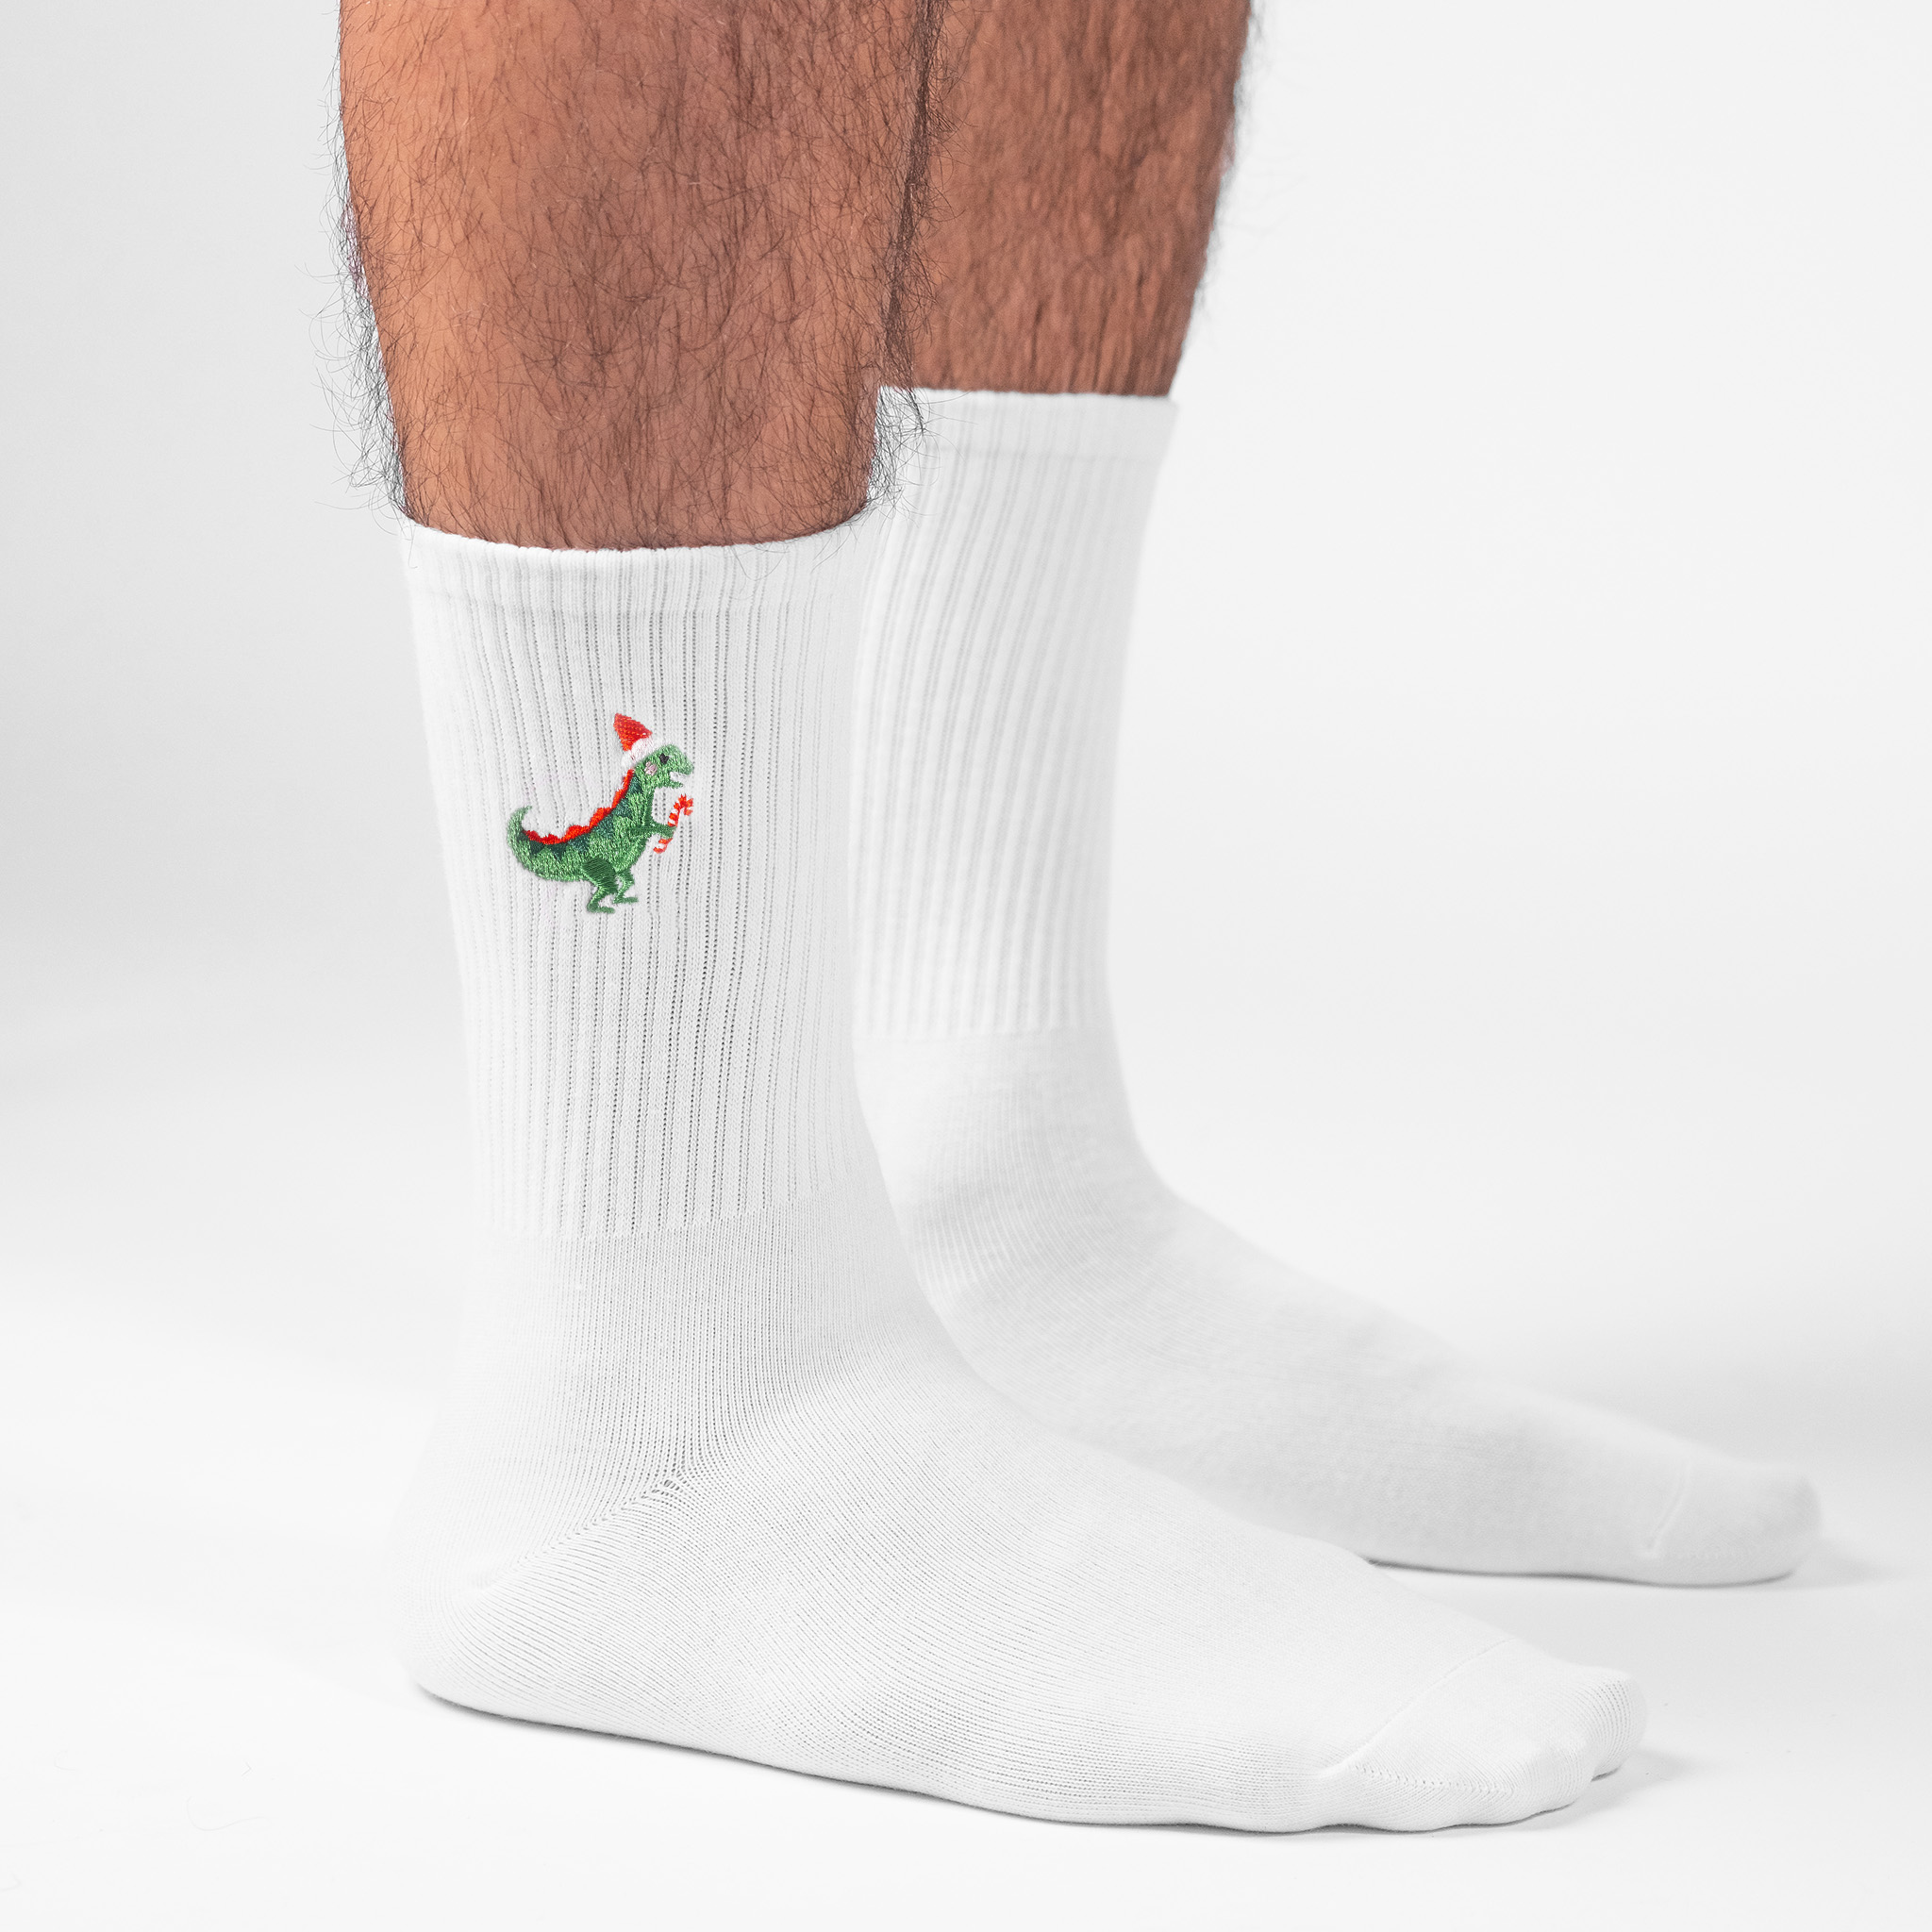 A male model wearing a pair of personalised white crew socks with the an dinosaur wearing a Santa hat and holding a candy cane embroidered onto each sock.